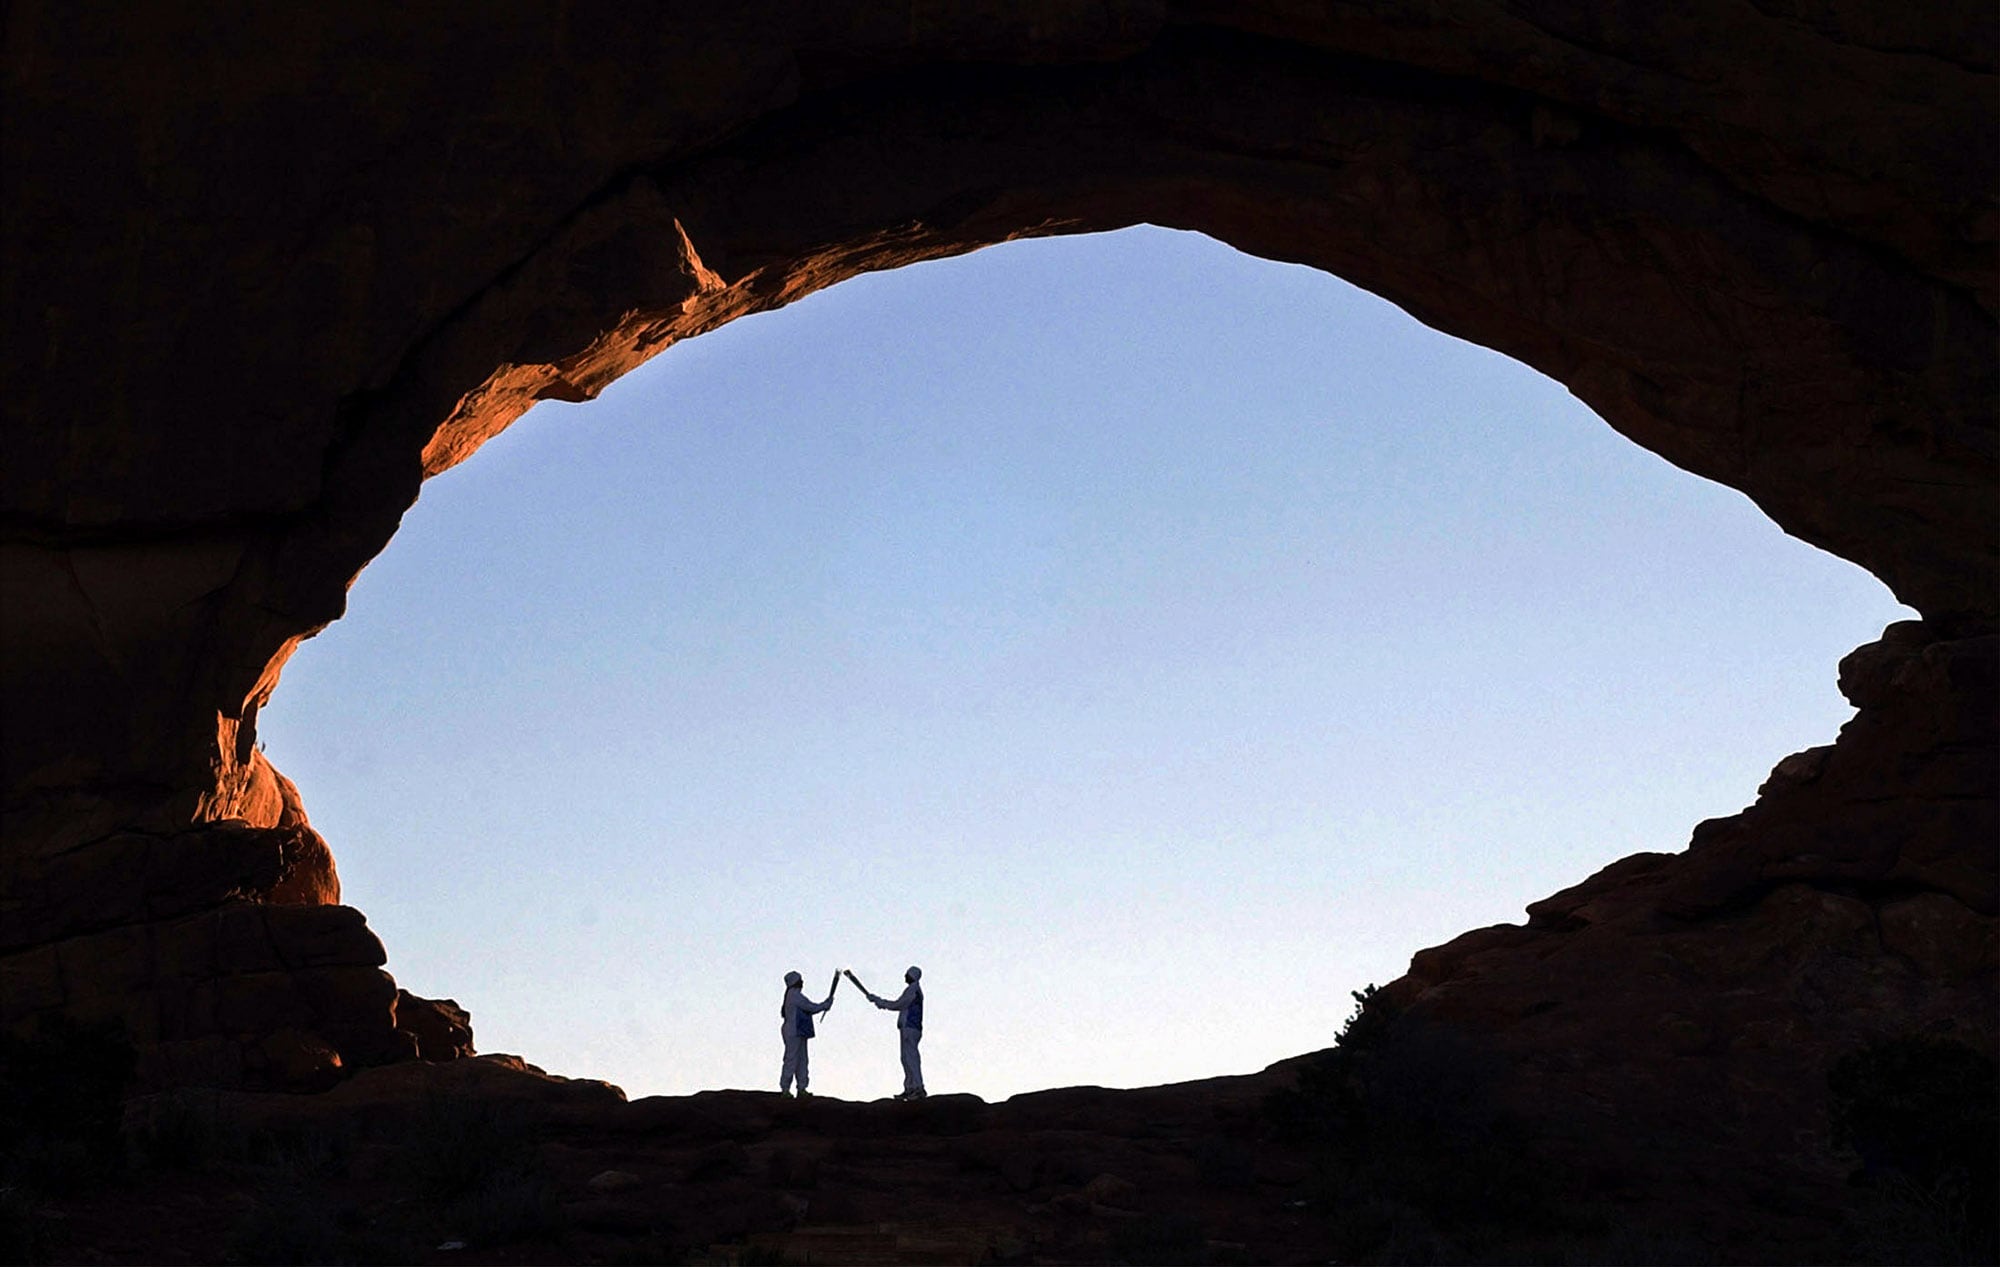 (Steve Griffin | The Salt Lake Tribune) Devan Lomayaoma, right, of Polacca, Ariz., lights the torch of Anne Wheelock Gonzales, of Santa Fe, N.M., as they stand under the North Window at Arches National Park, Monday, Feb. 4, 2002.